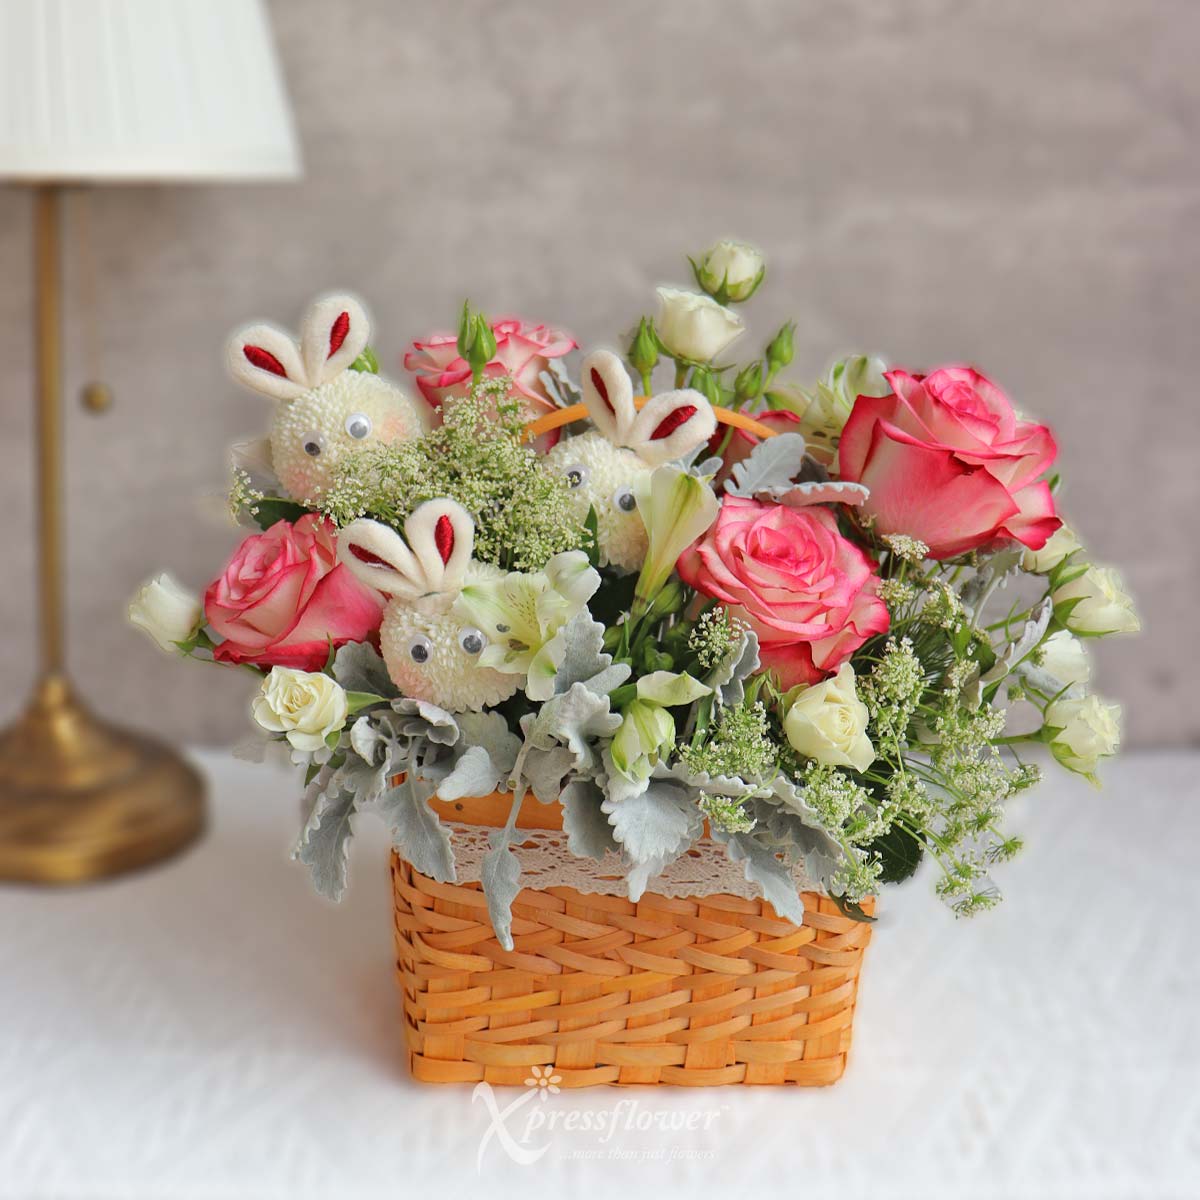 AR2313_Bunny Blossoms 5 Two-Toned Pink Roses with White Bunny Ping Pong Flowers 3a